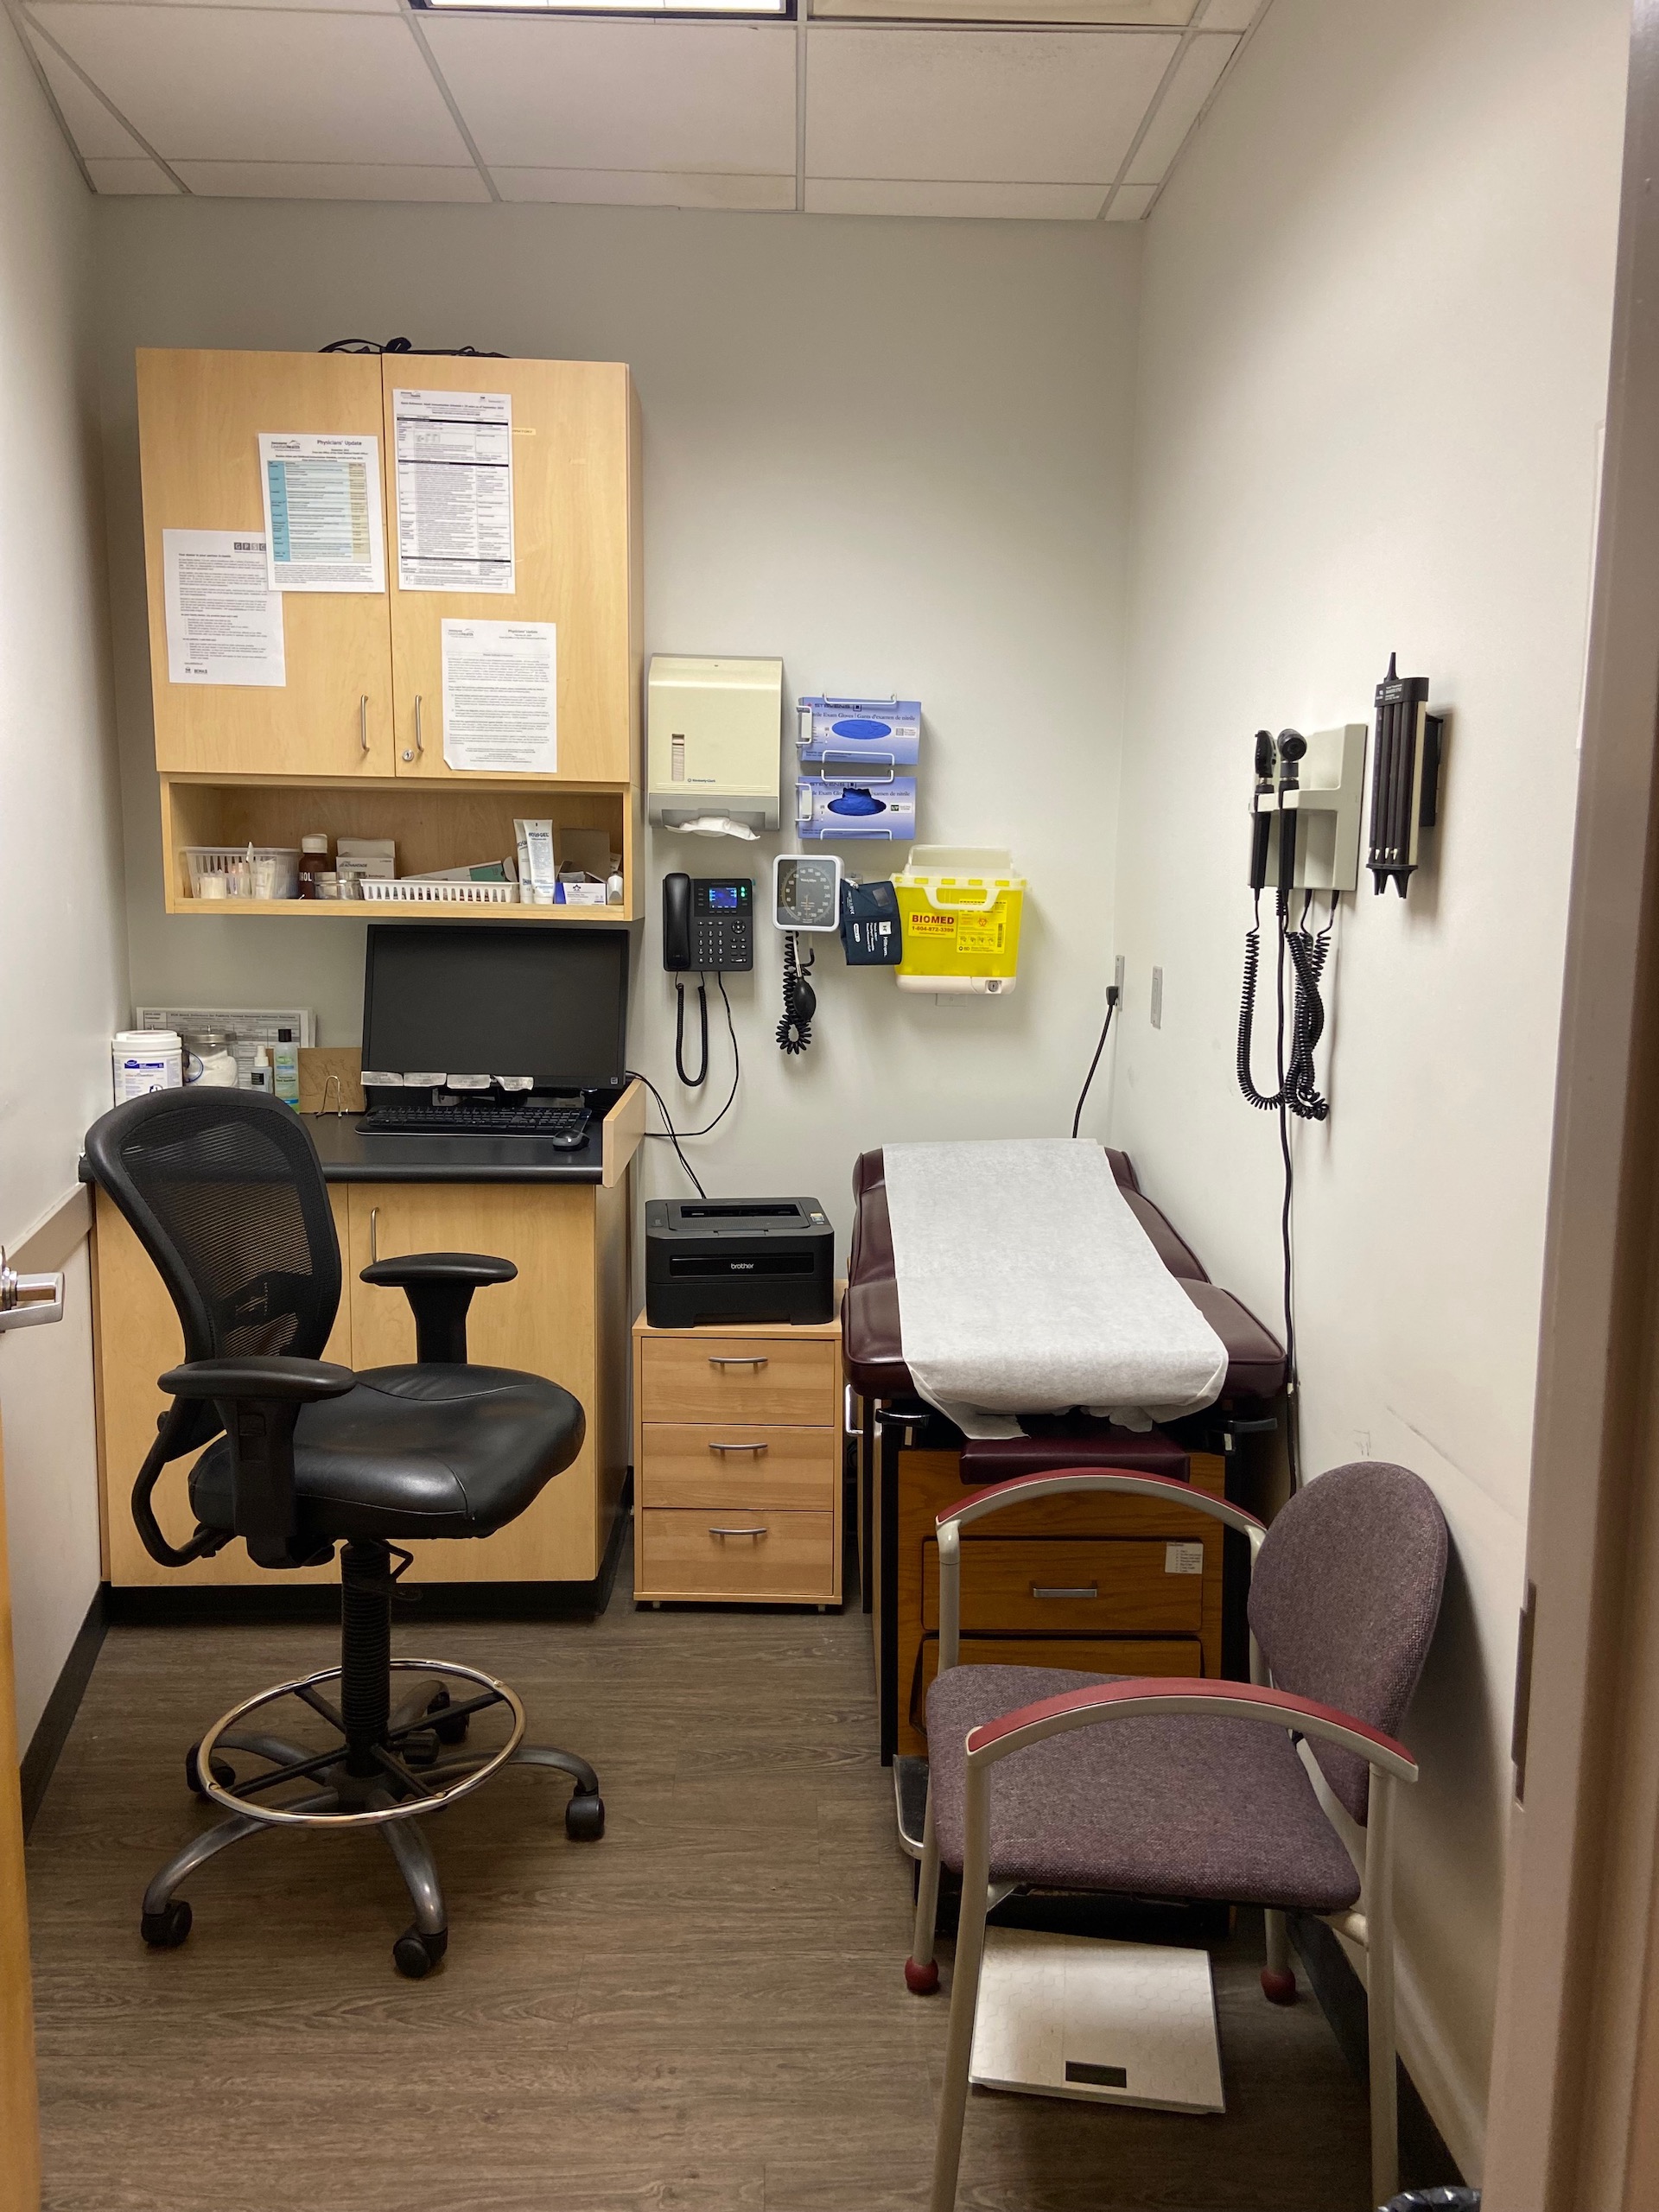 WELL Health - Fairview Slopes - Well Clinics